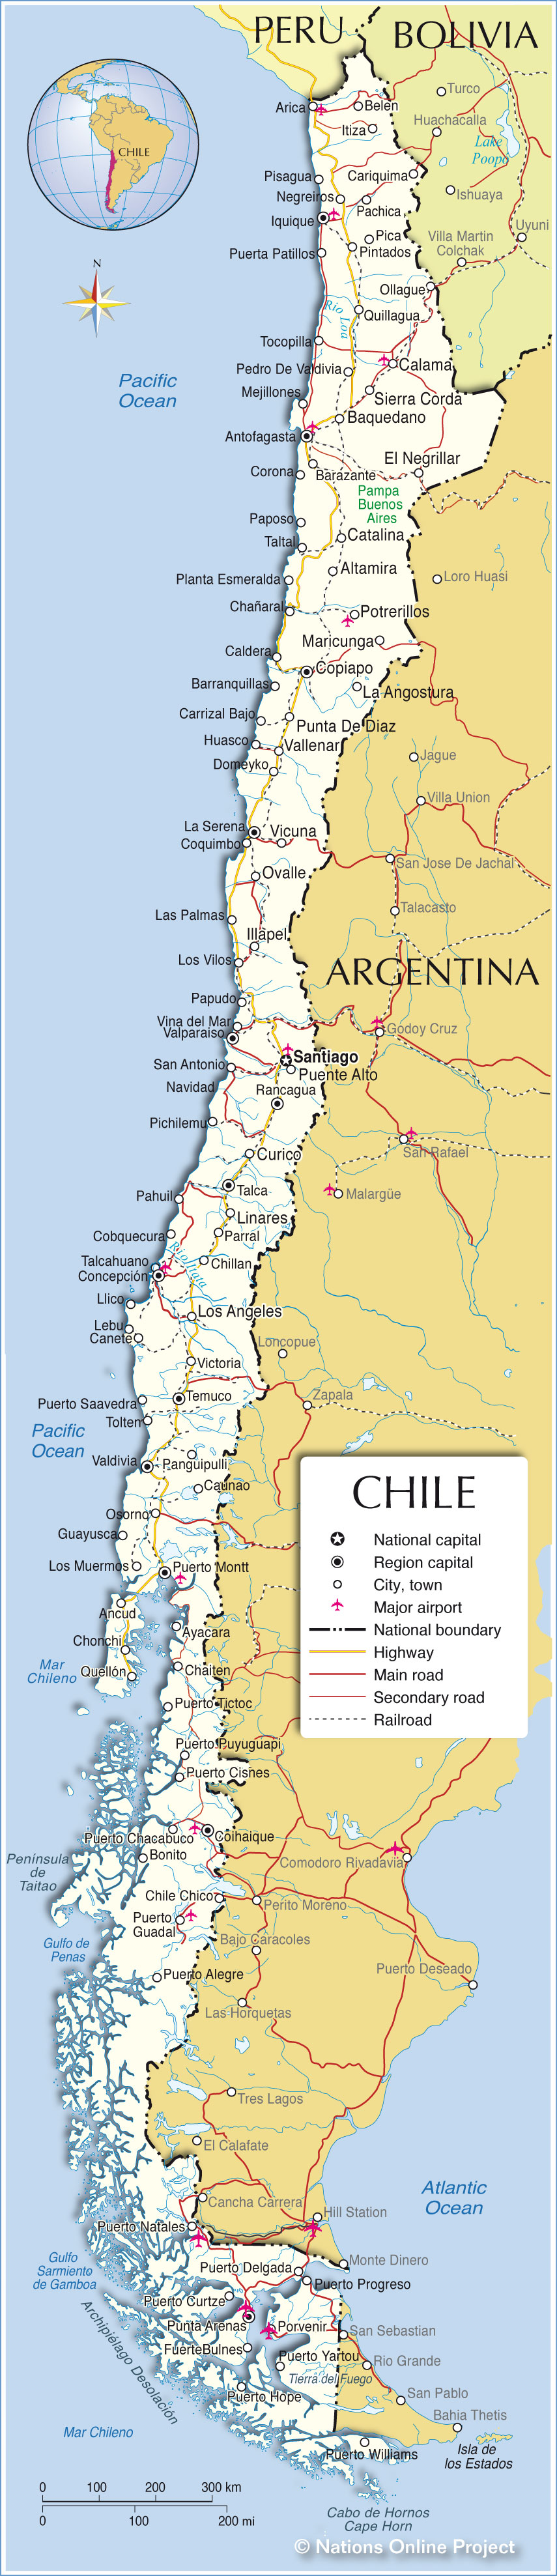 Chile Map - Chile Map And 100 More Free Printable International Maps